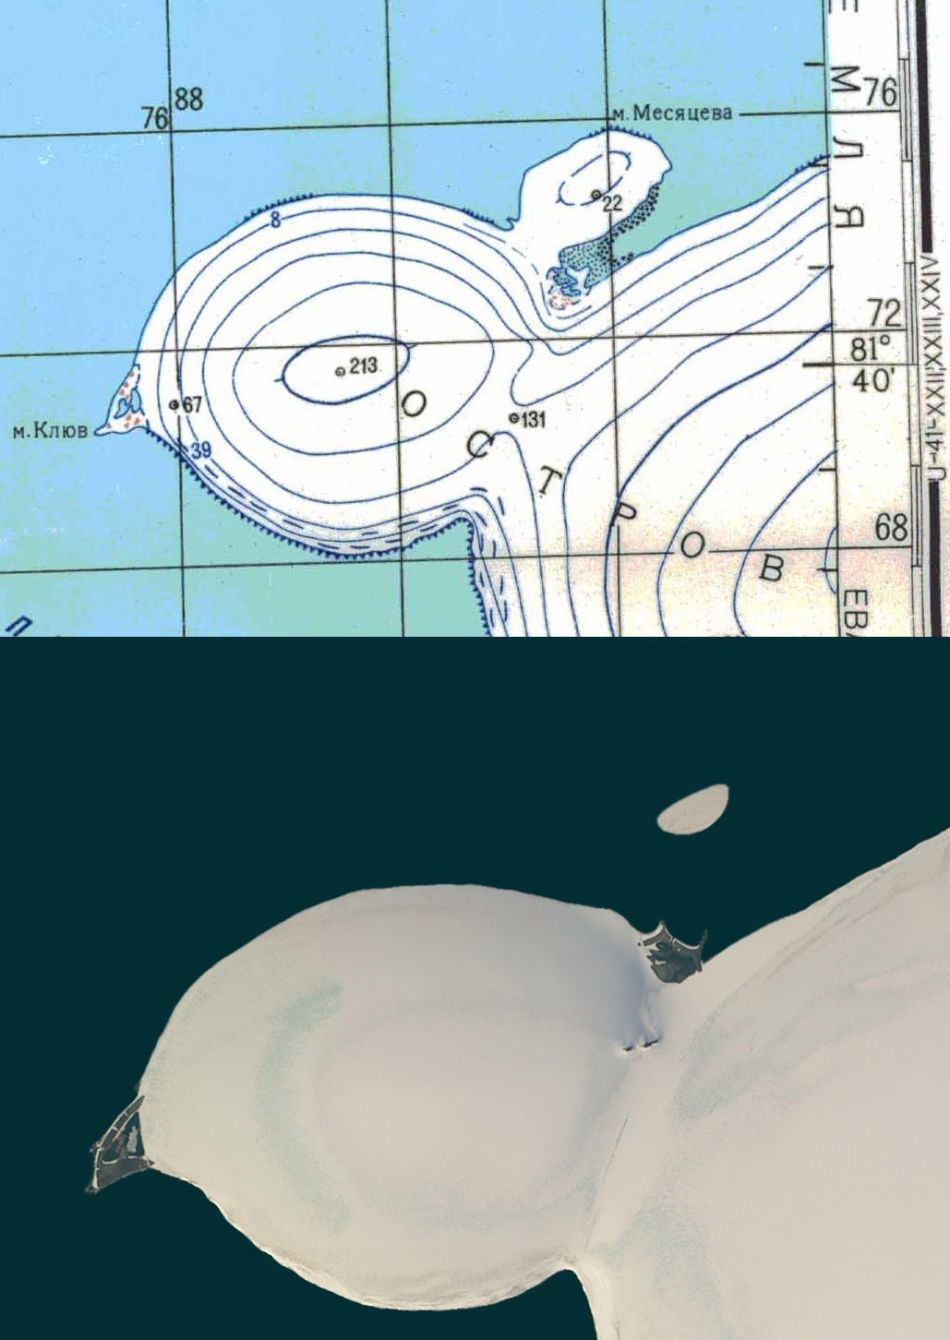 Cape Mesyatsev on a map and a current photo